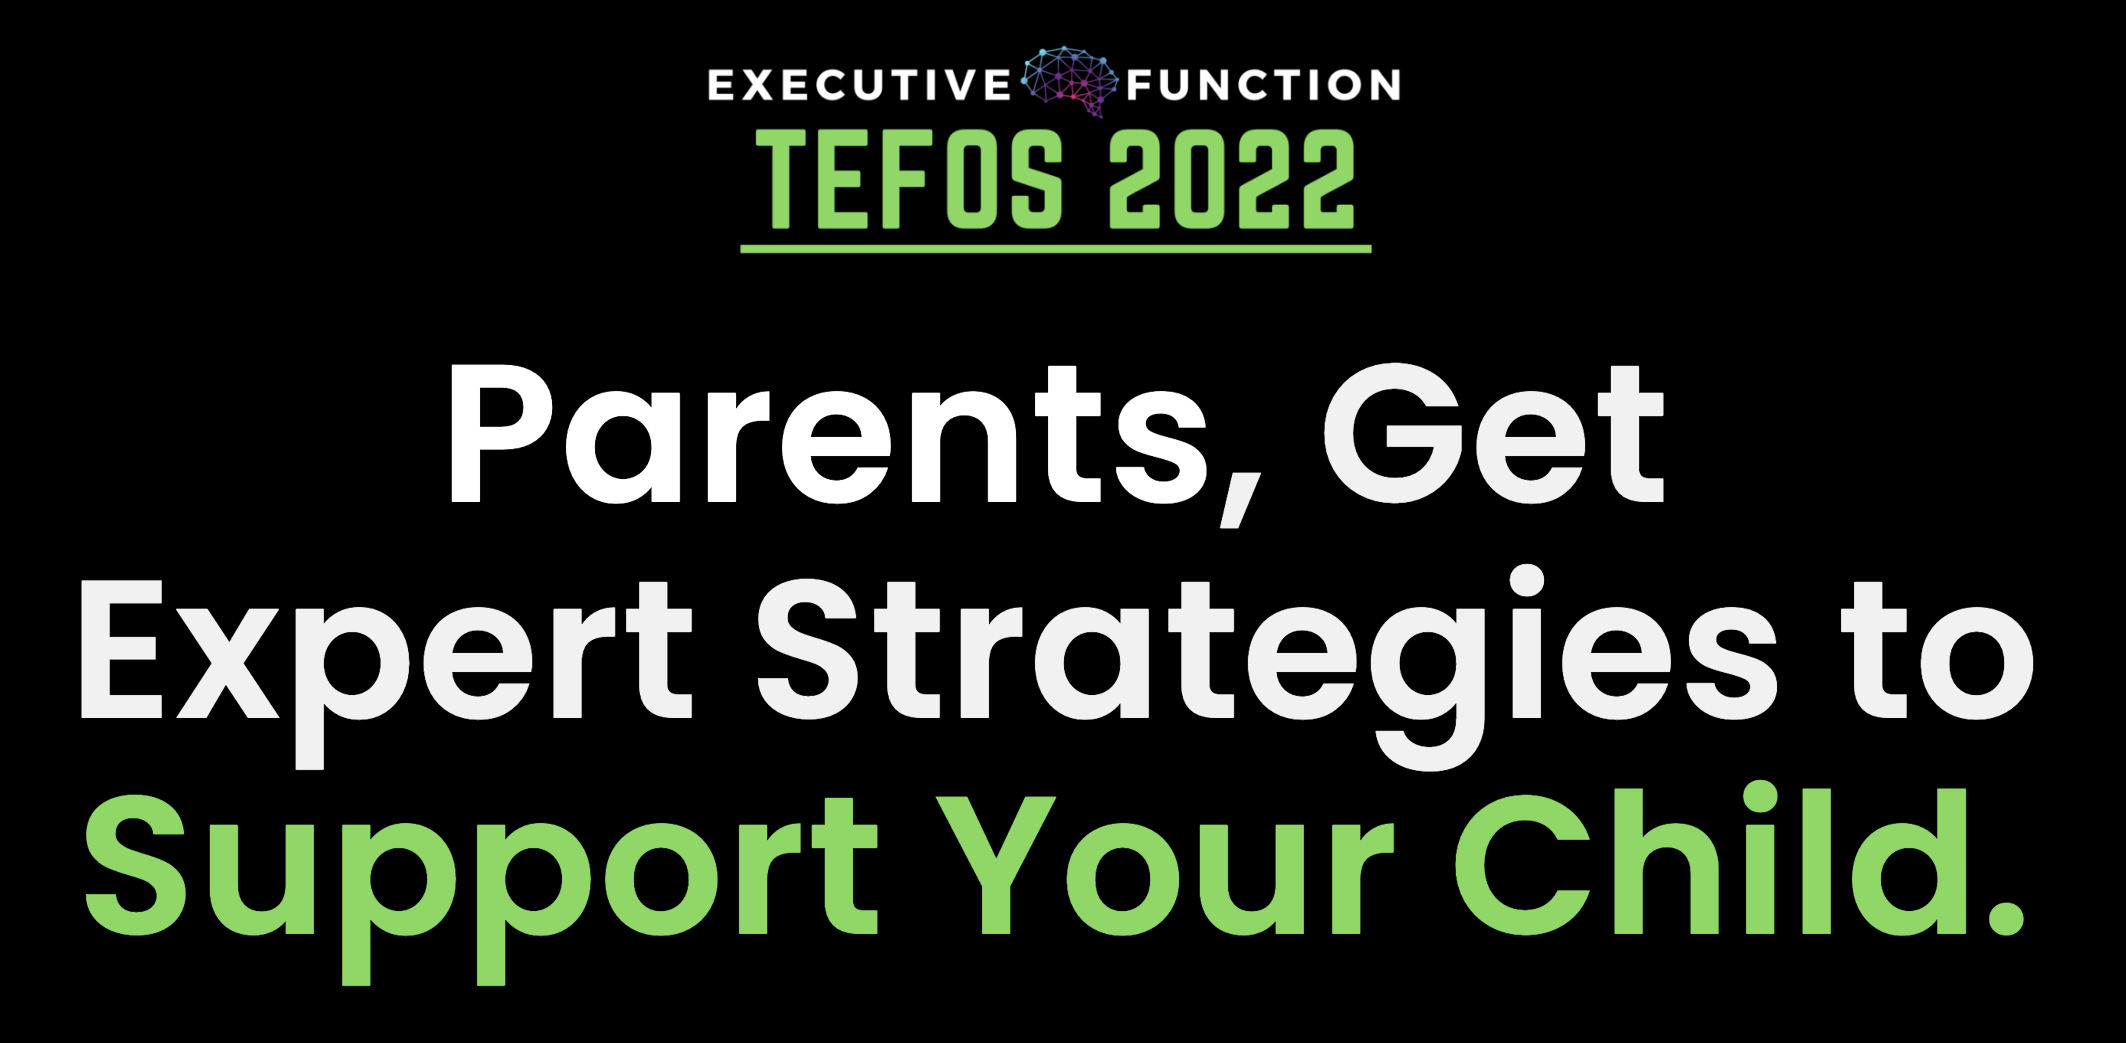 Tefos 2022: Parents, get expert strategies to support your child.